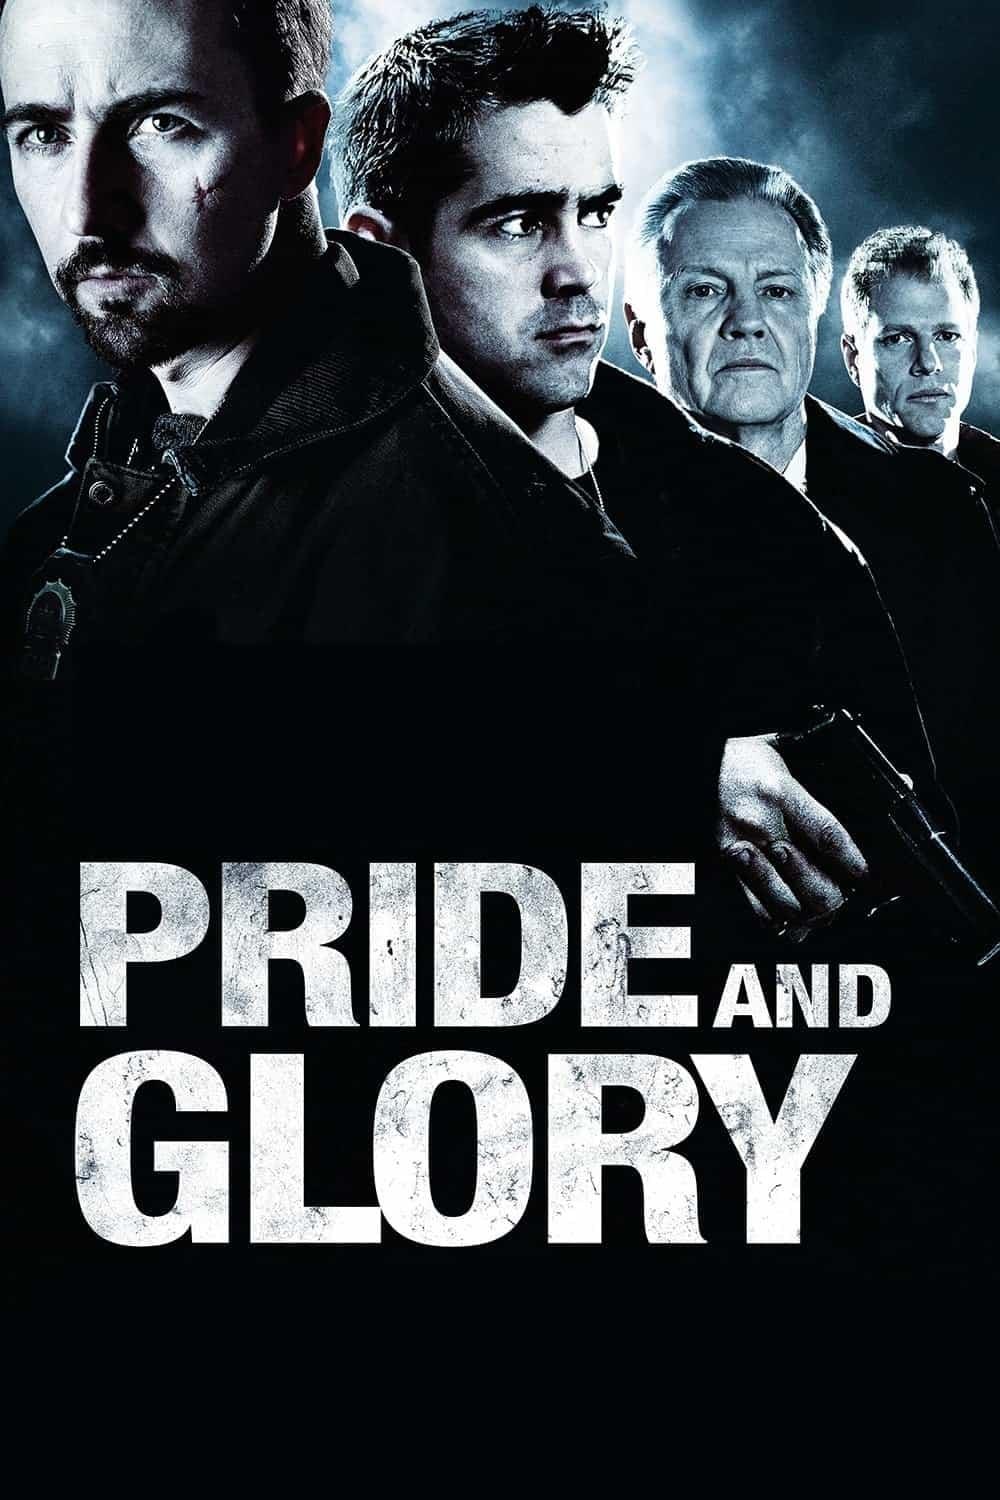 Pride and Glory poster